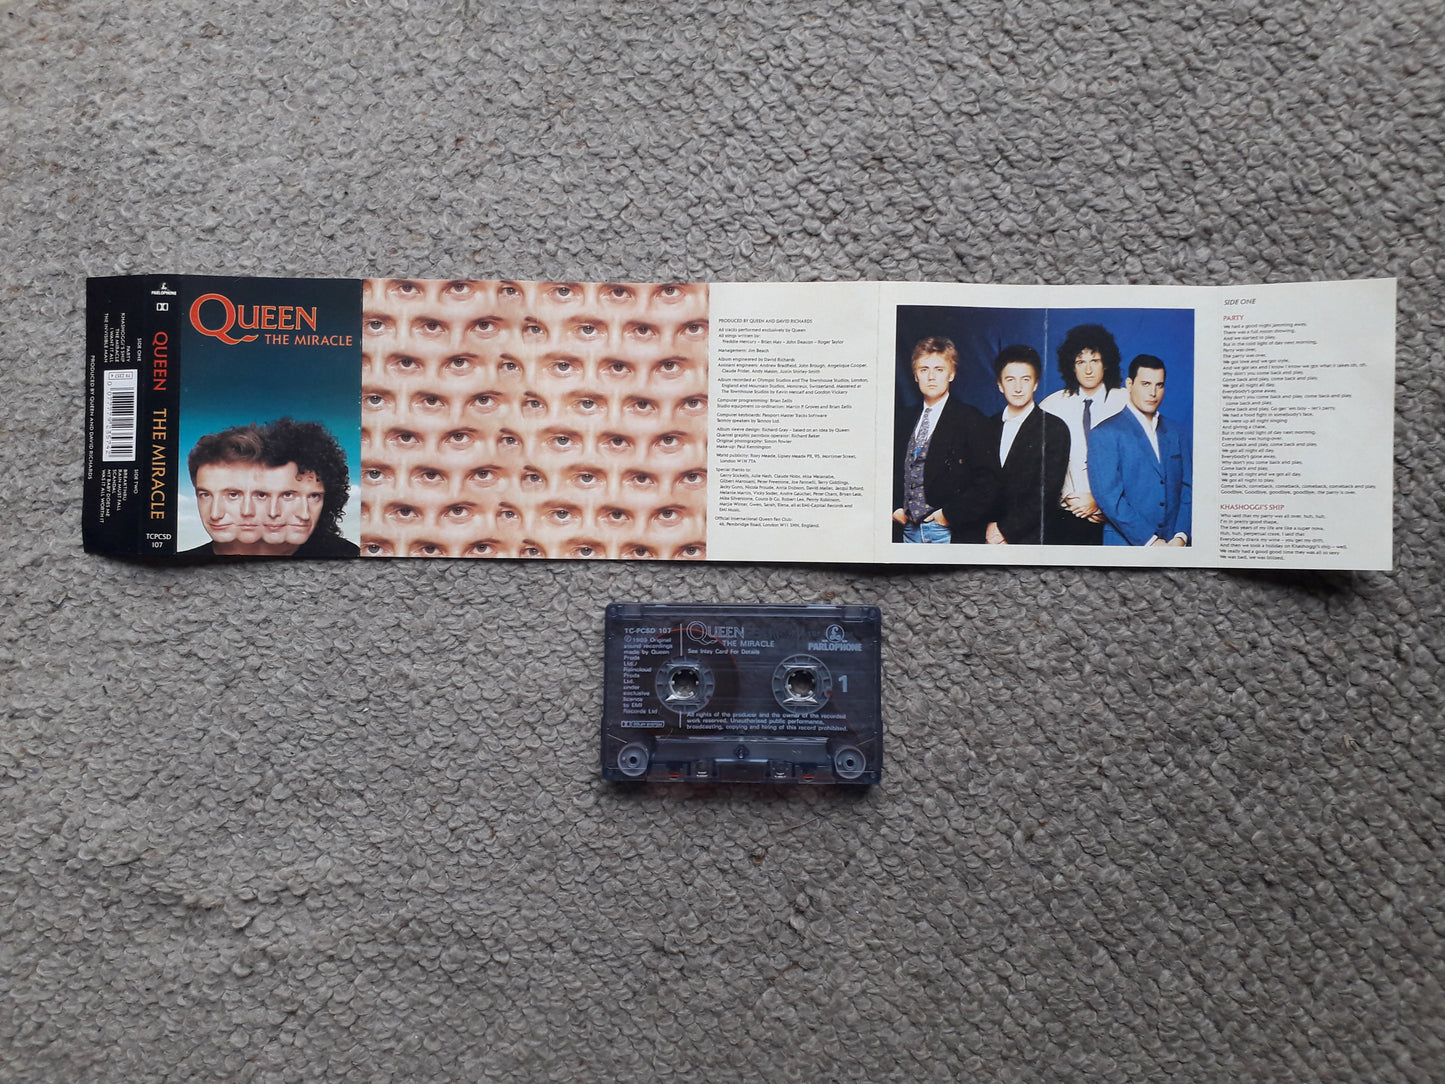 Queen-The Miracle Cassette ((TCPCSD 107)